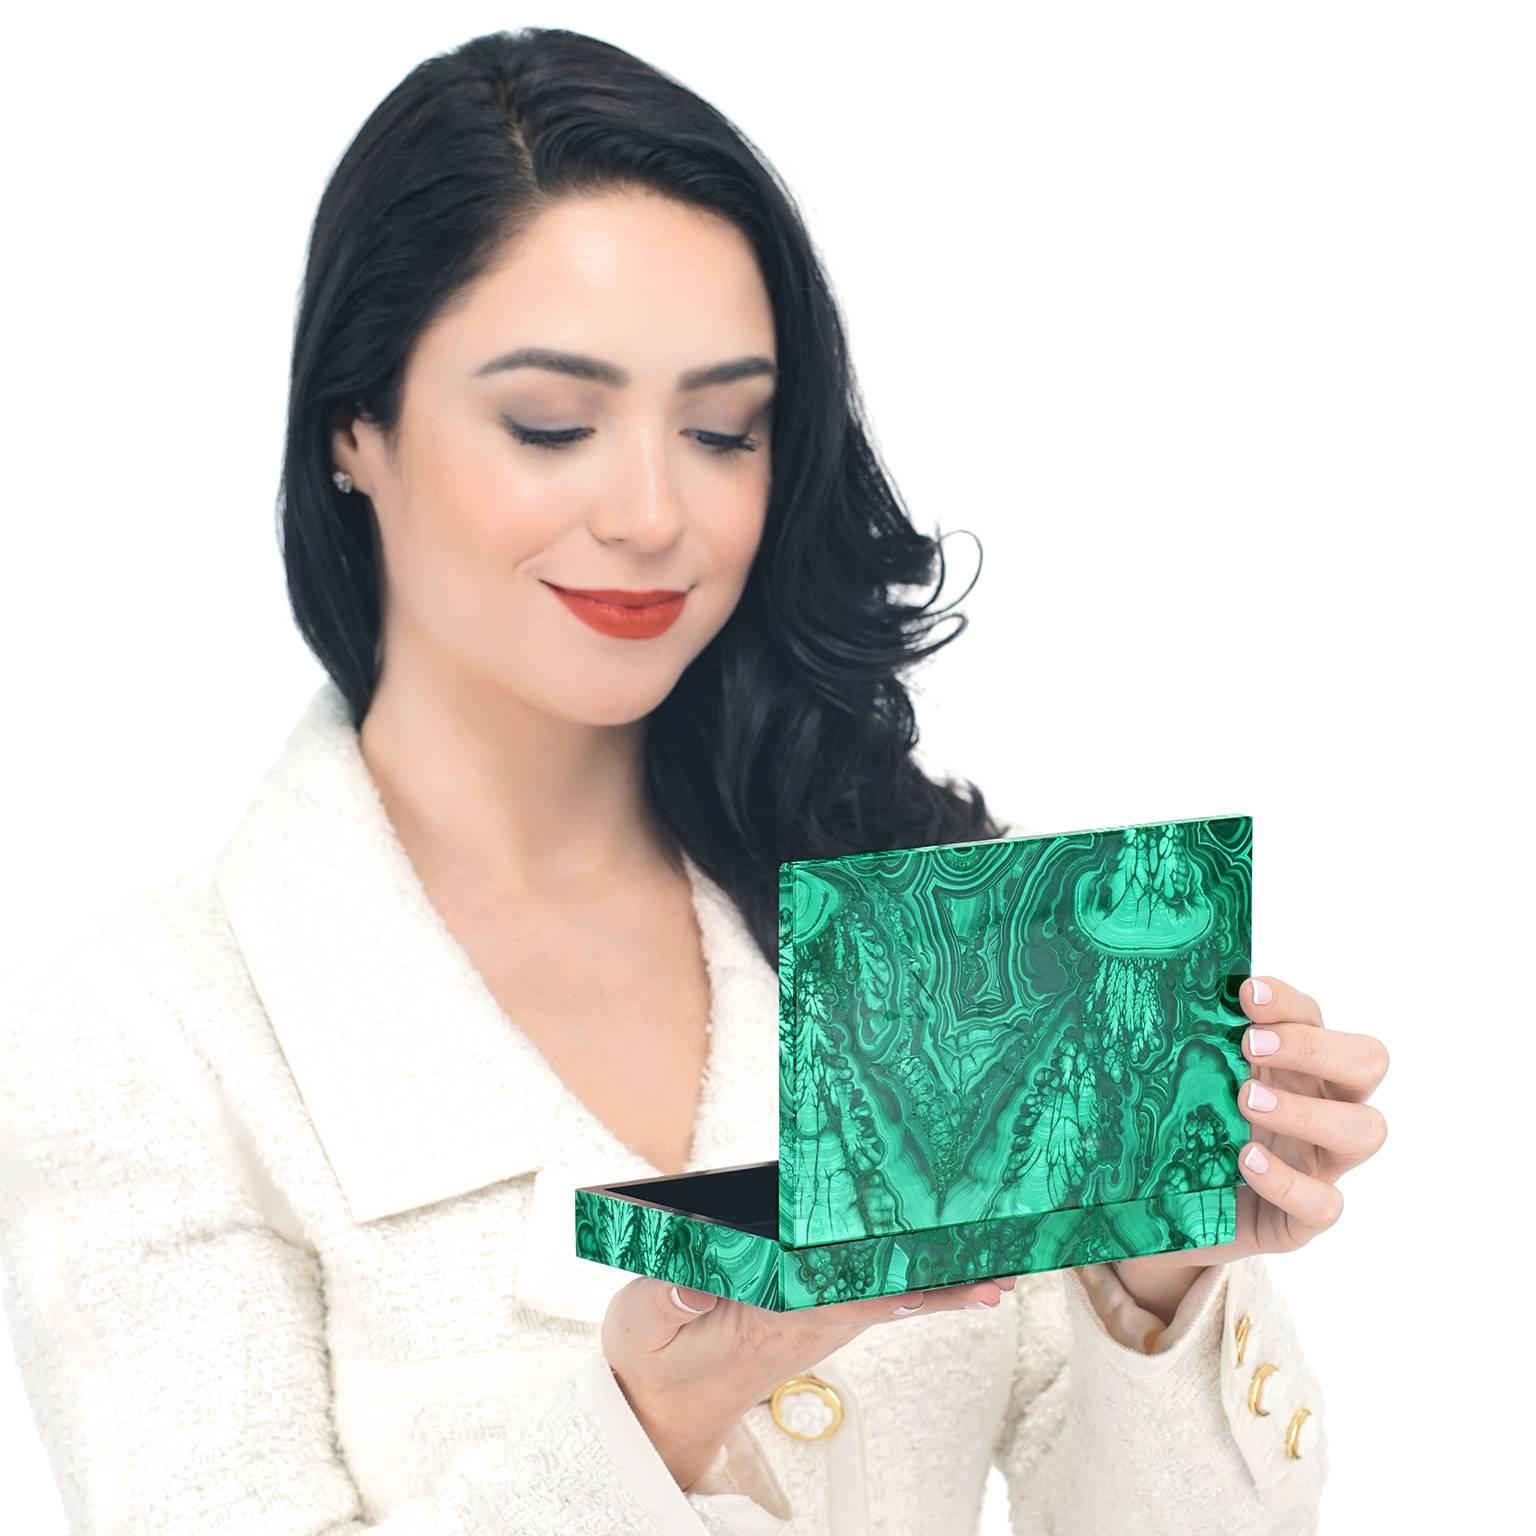 Circa 1970s, Malachite, Italy.   This fabulous Italian made hardstone box is a sleek, colorful example of seventies decorative objets. The Malachite was chosen for its particularly fine figure and vividly contrasting colors. Very good condition.